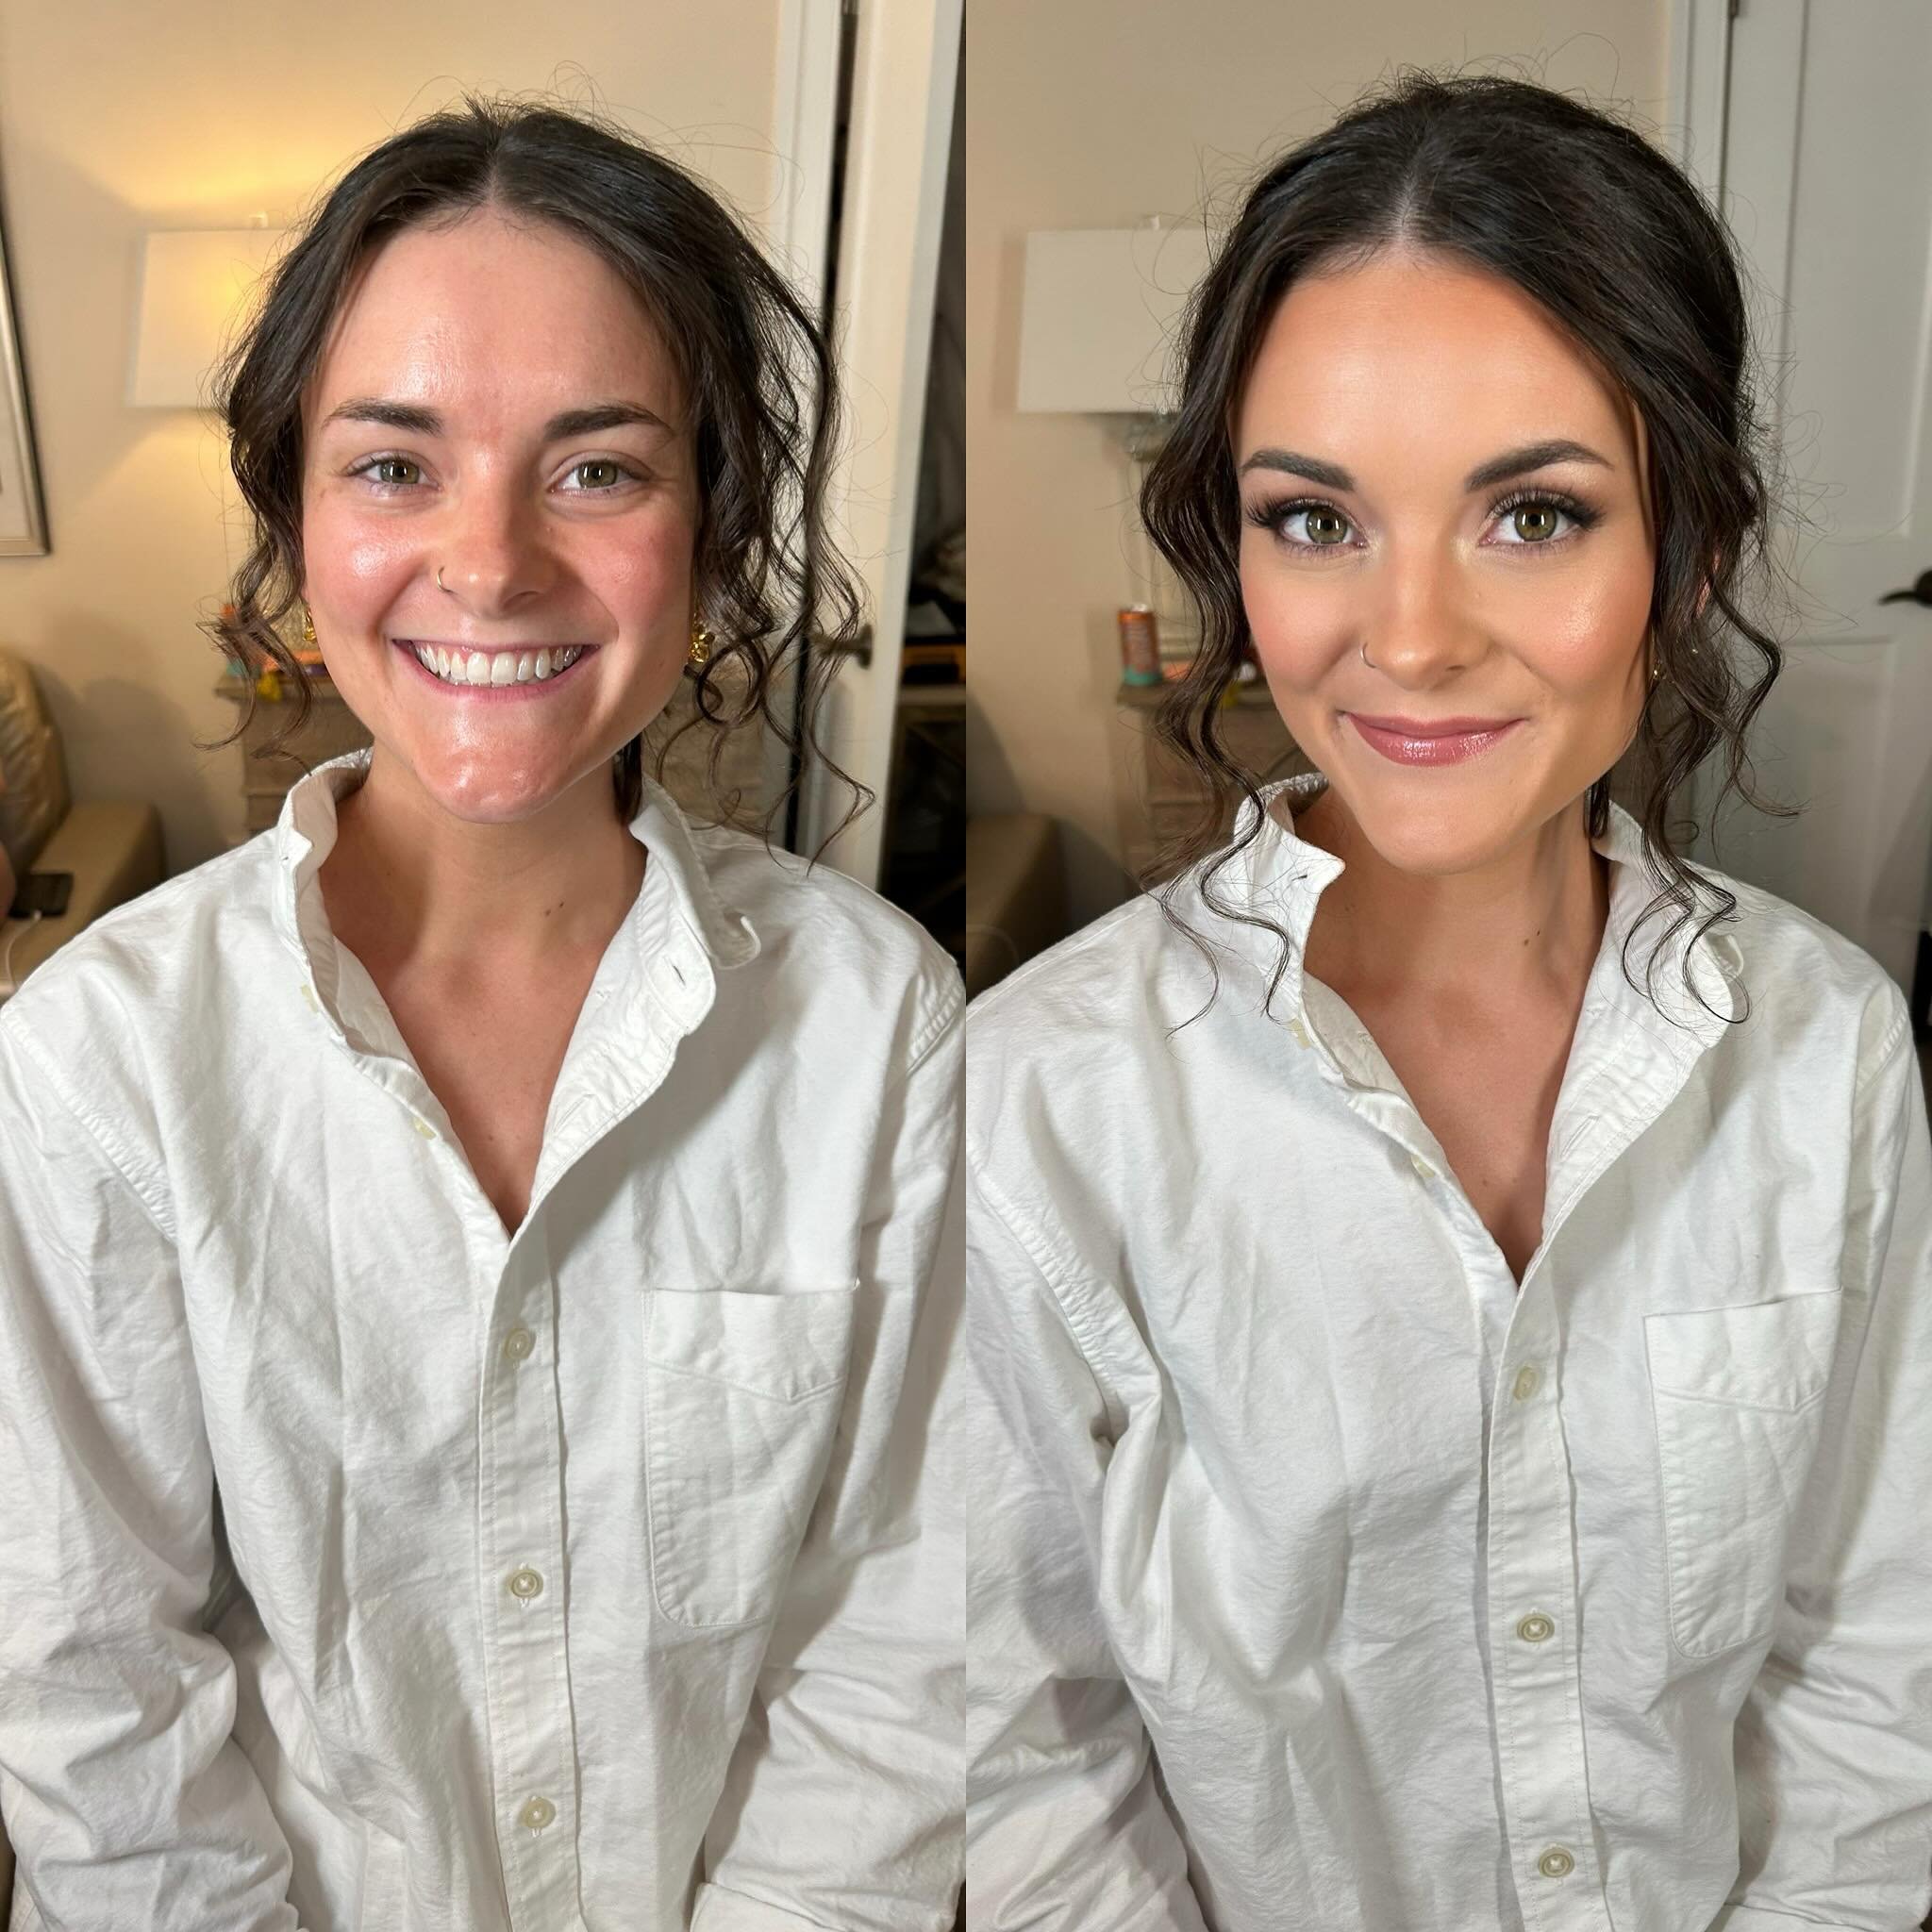 Allison 🤍  Romantic + Ethereal Bride. Before she was stunning too- but come on!!! What a stunning bride!! Thank you for sharing your day with us! 
 ⁣
#bridalhair #bridalmakeup #weddinghair #bride #wedding #bridal #weddingmakeup #cleansoftglam #softg